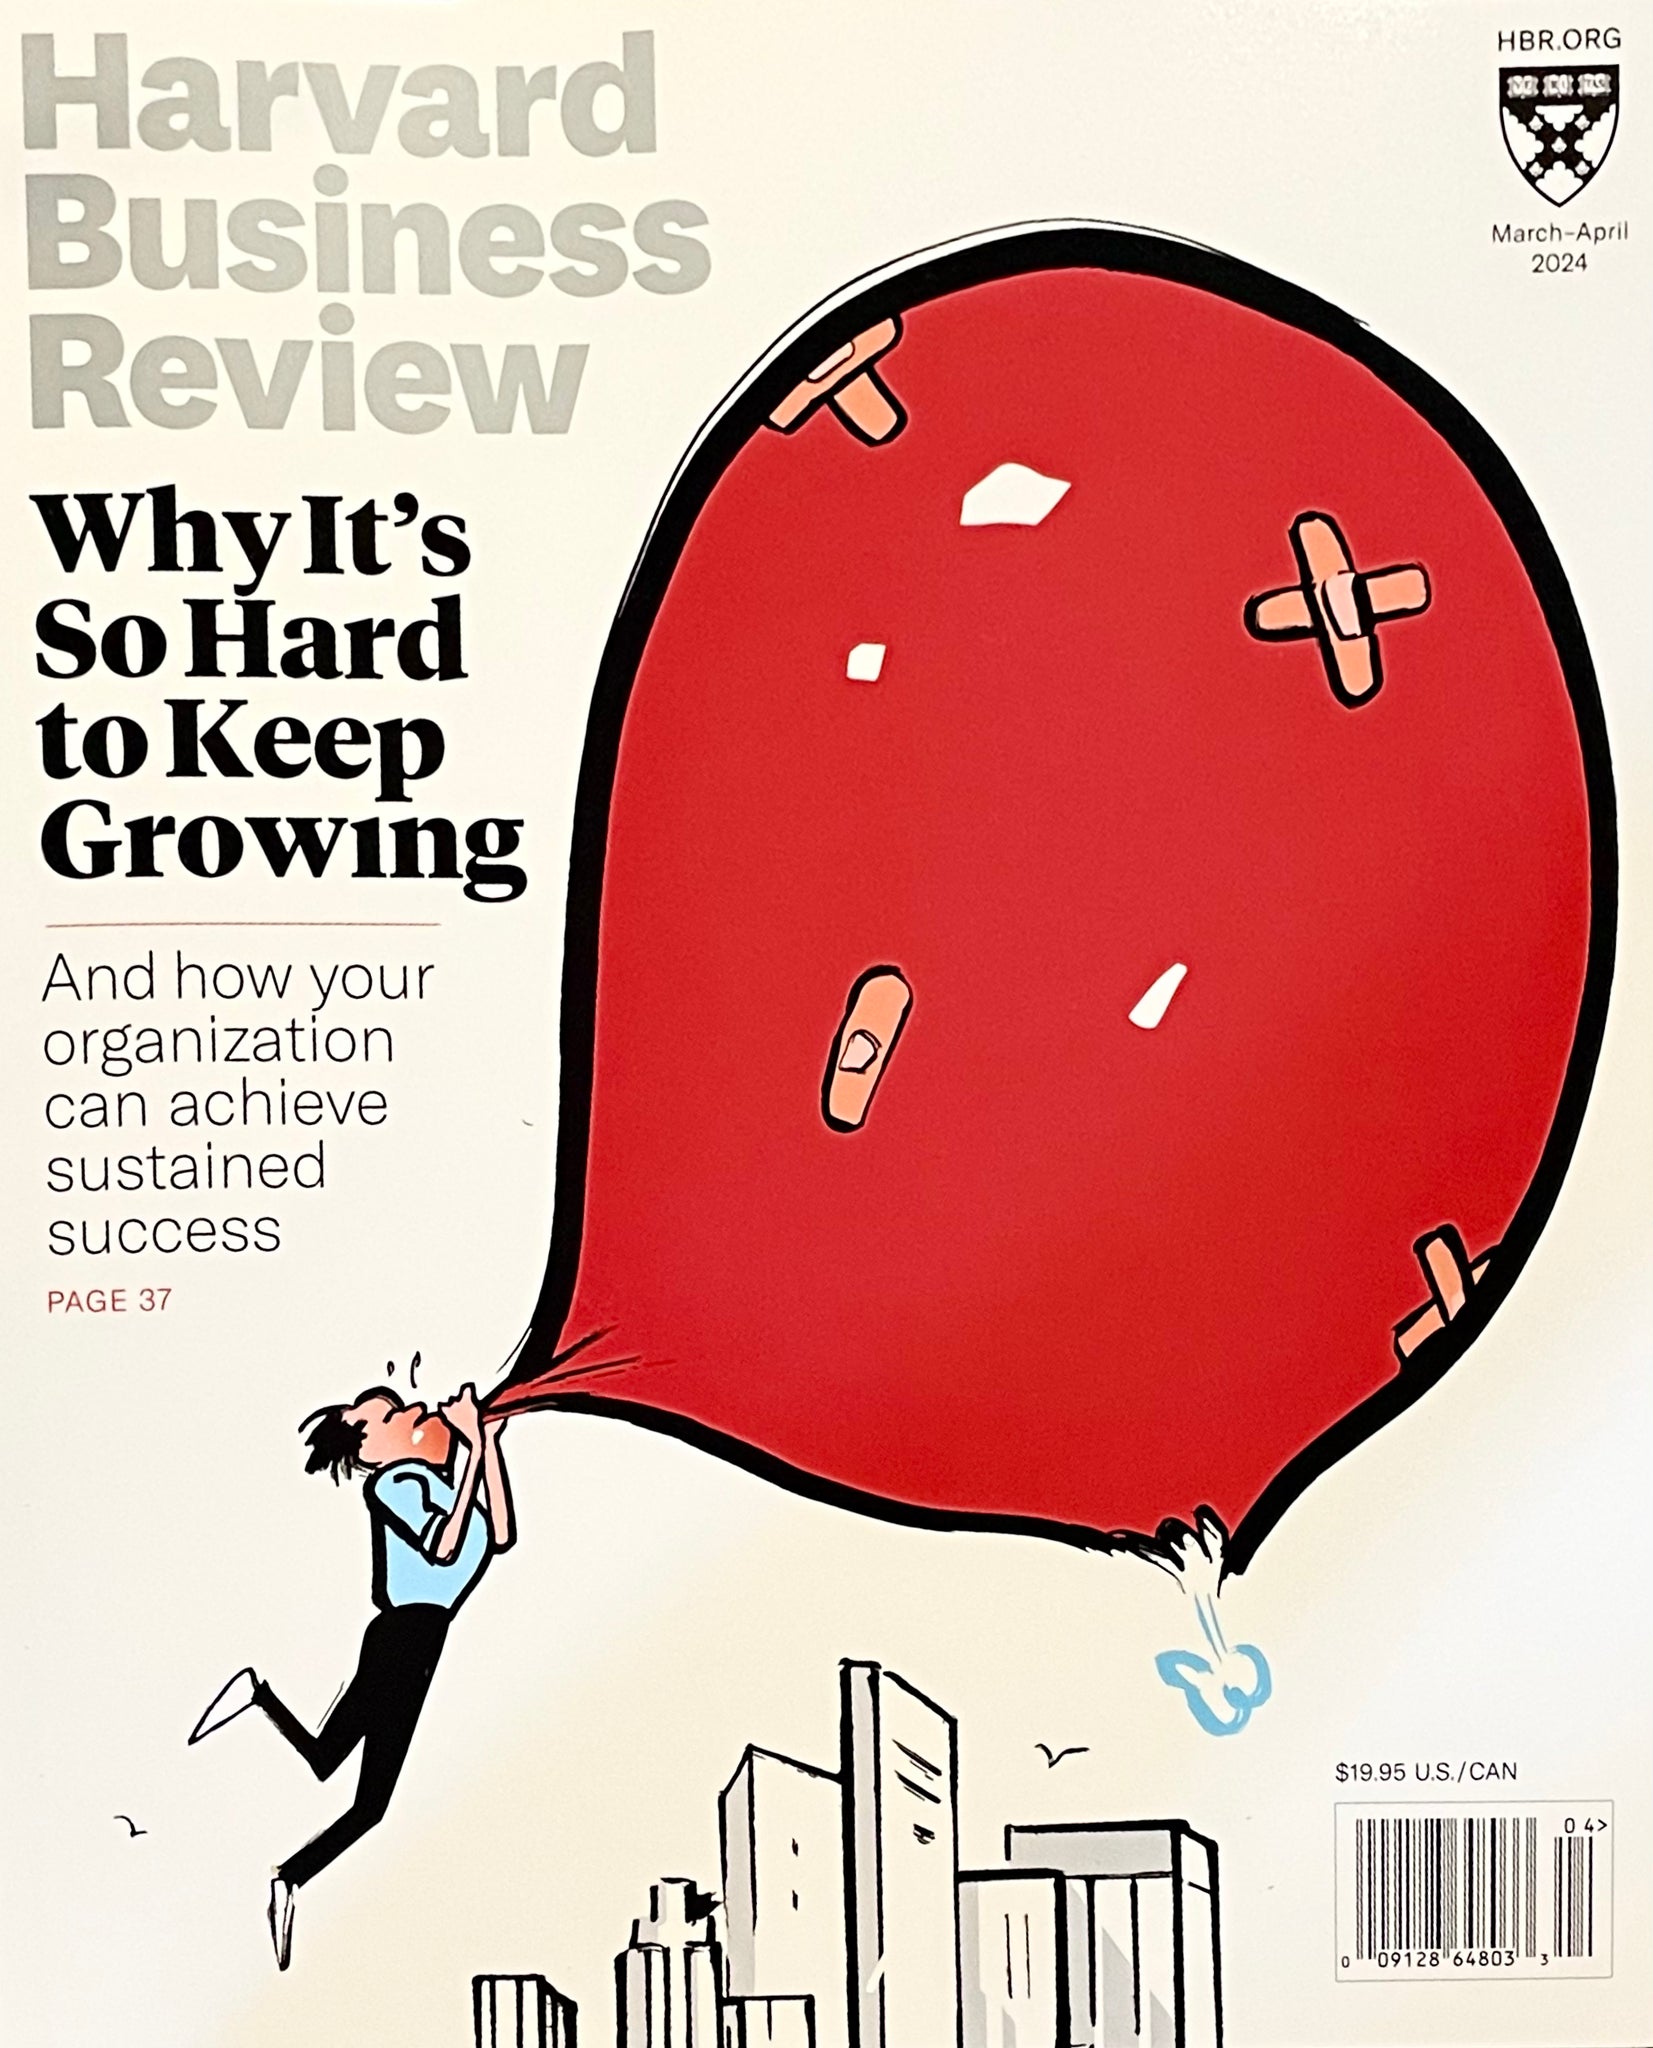 Harvard Business Review, March/April 2024